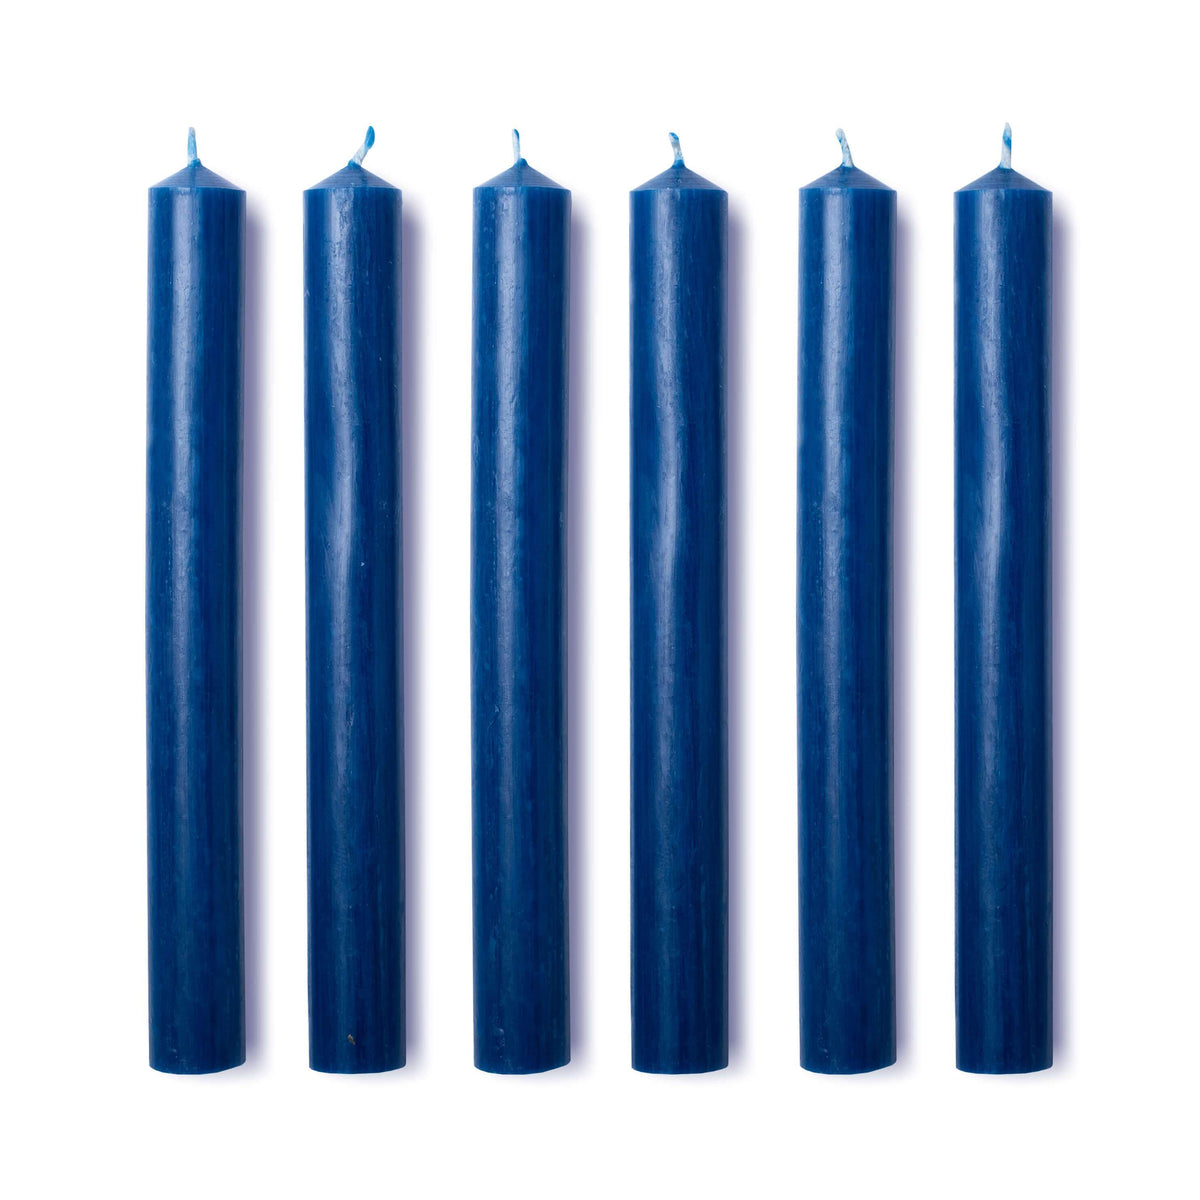 Dinner Candles in Lupin Blue